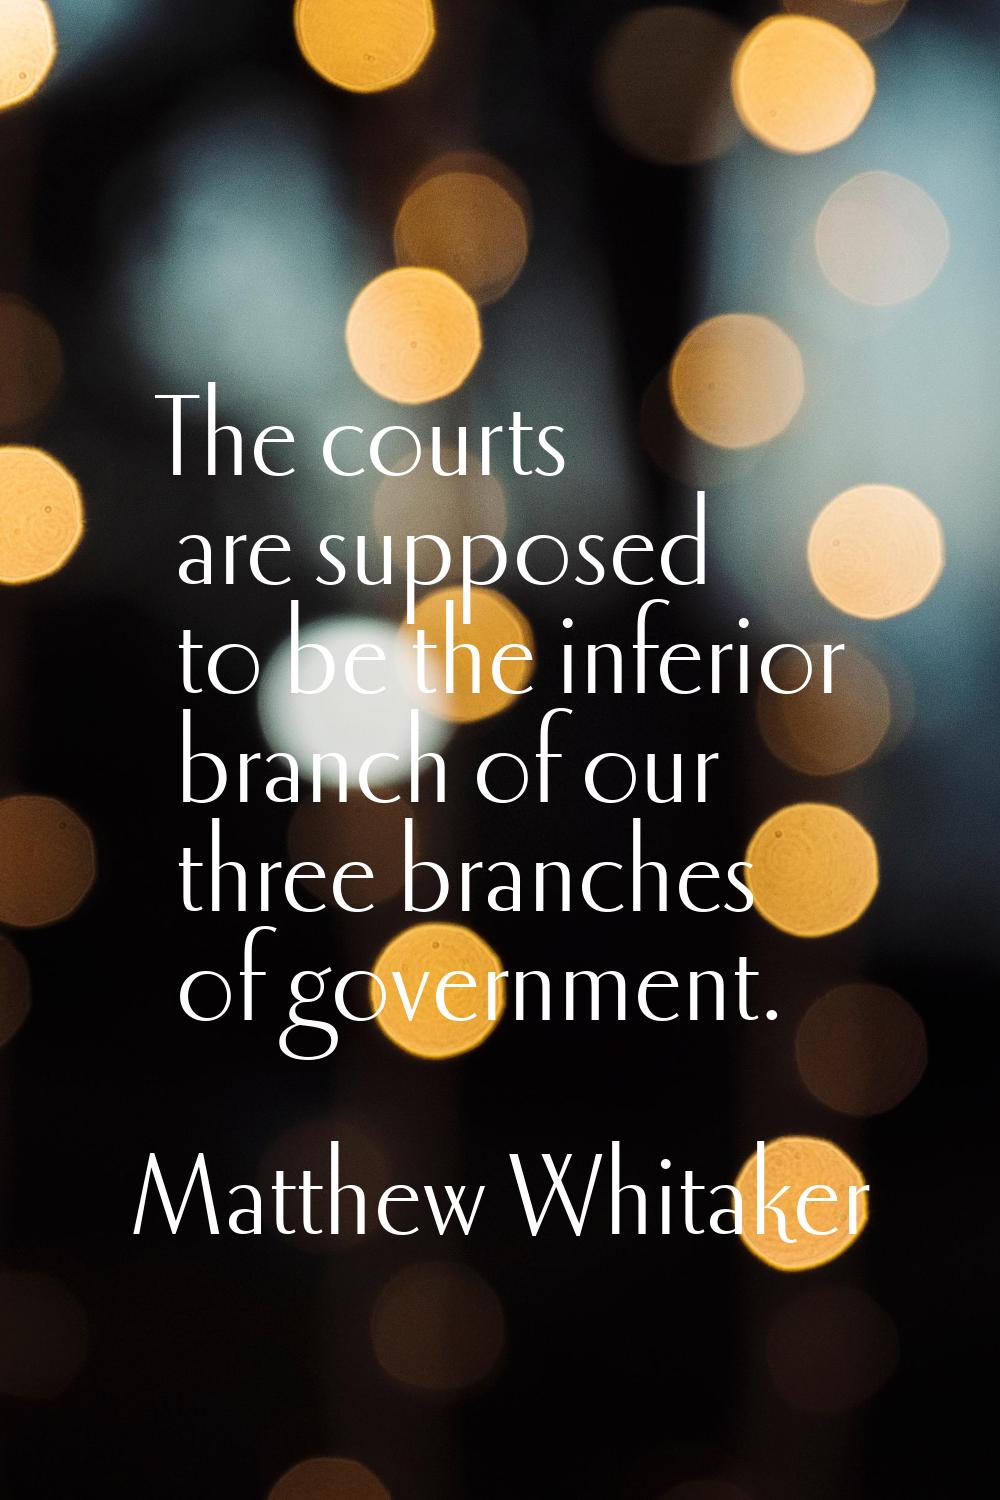 The courts are supposed to be the inferior branch of our three branches of government.